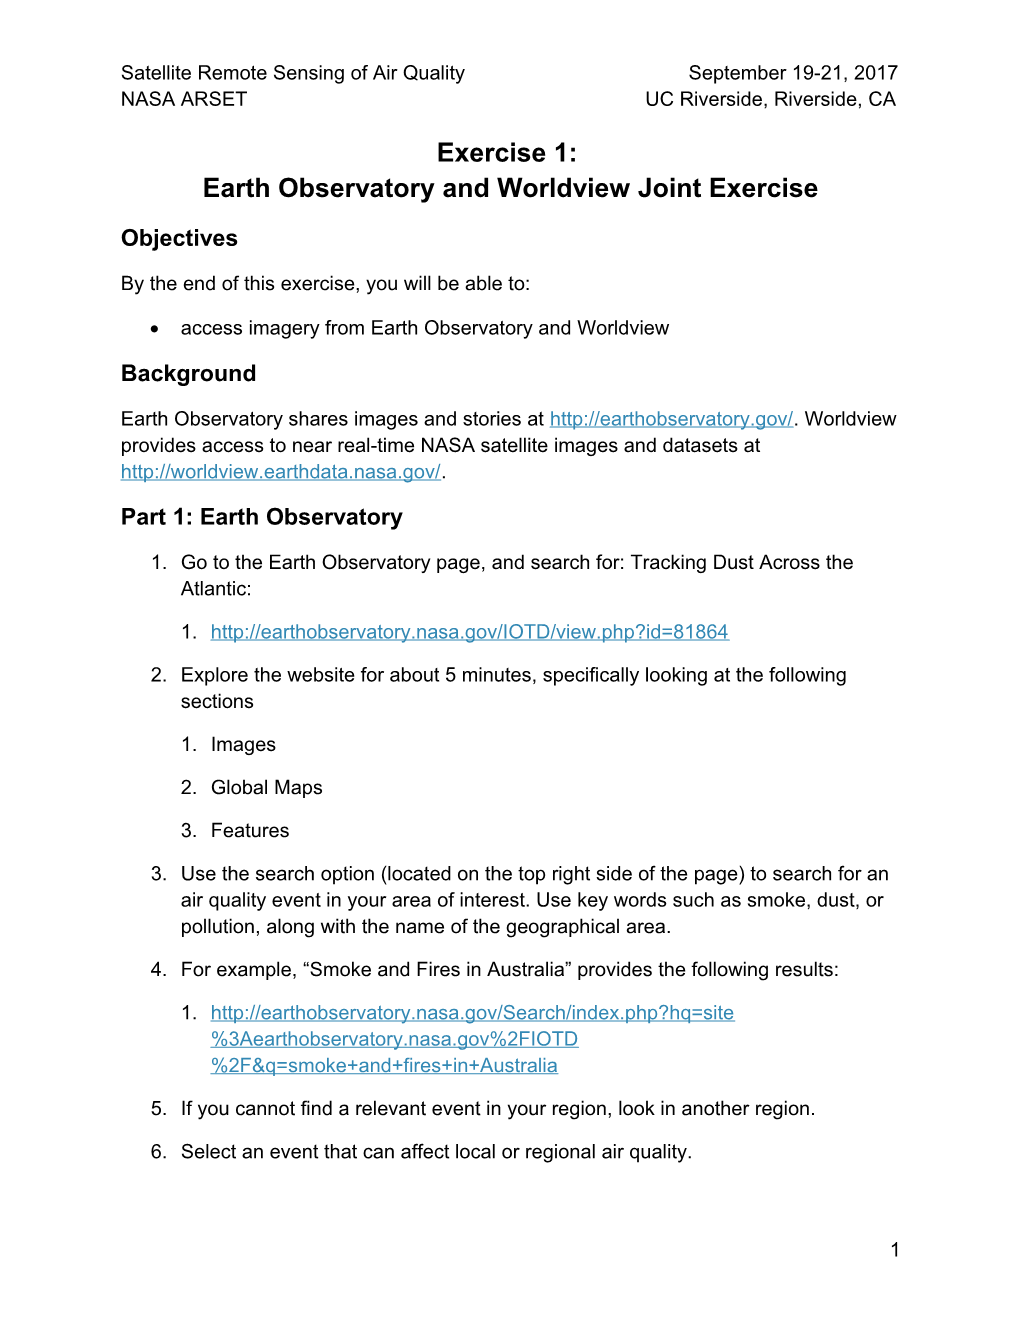 Exercise 1: Earth Observatory and Worldview Joint Exercise